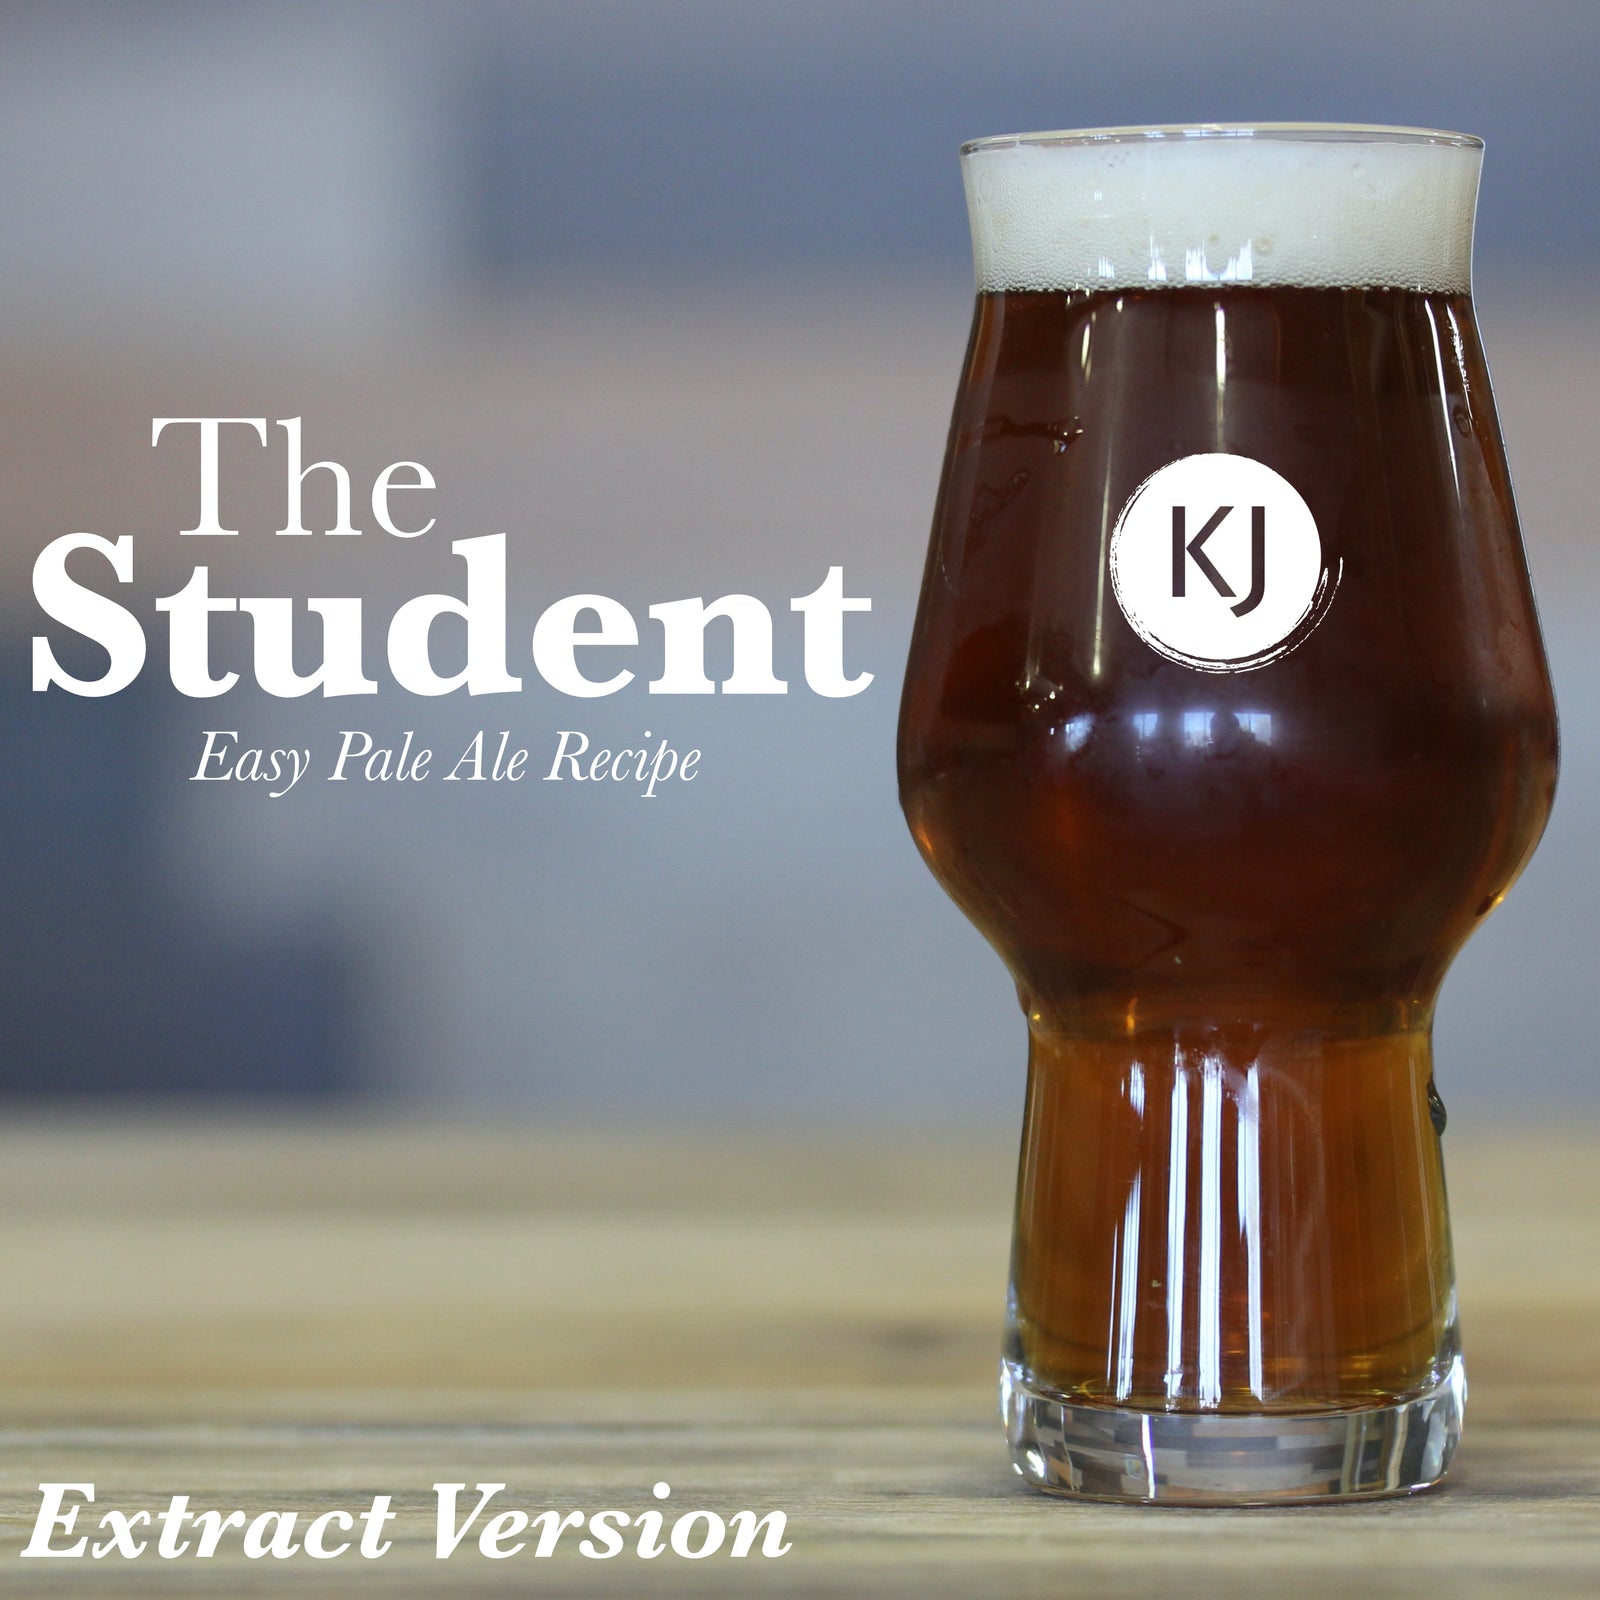 The Student - Extract Version